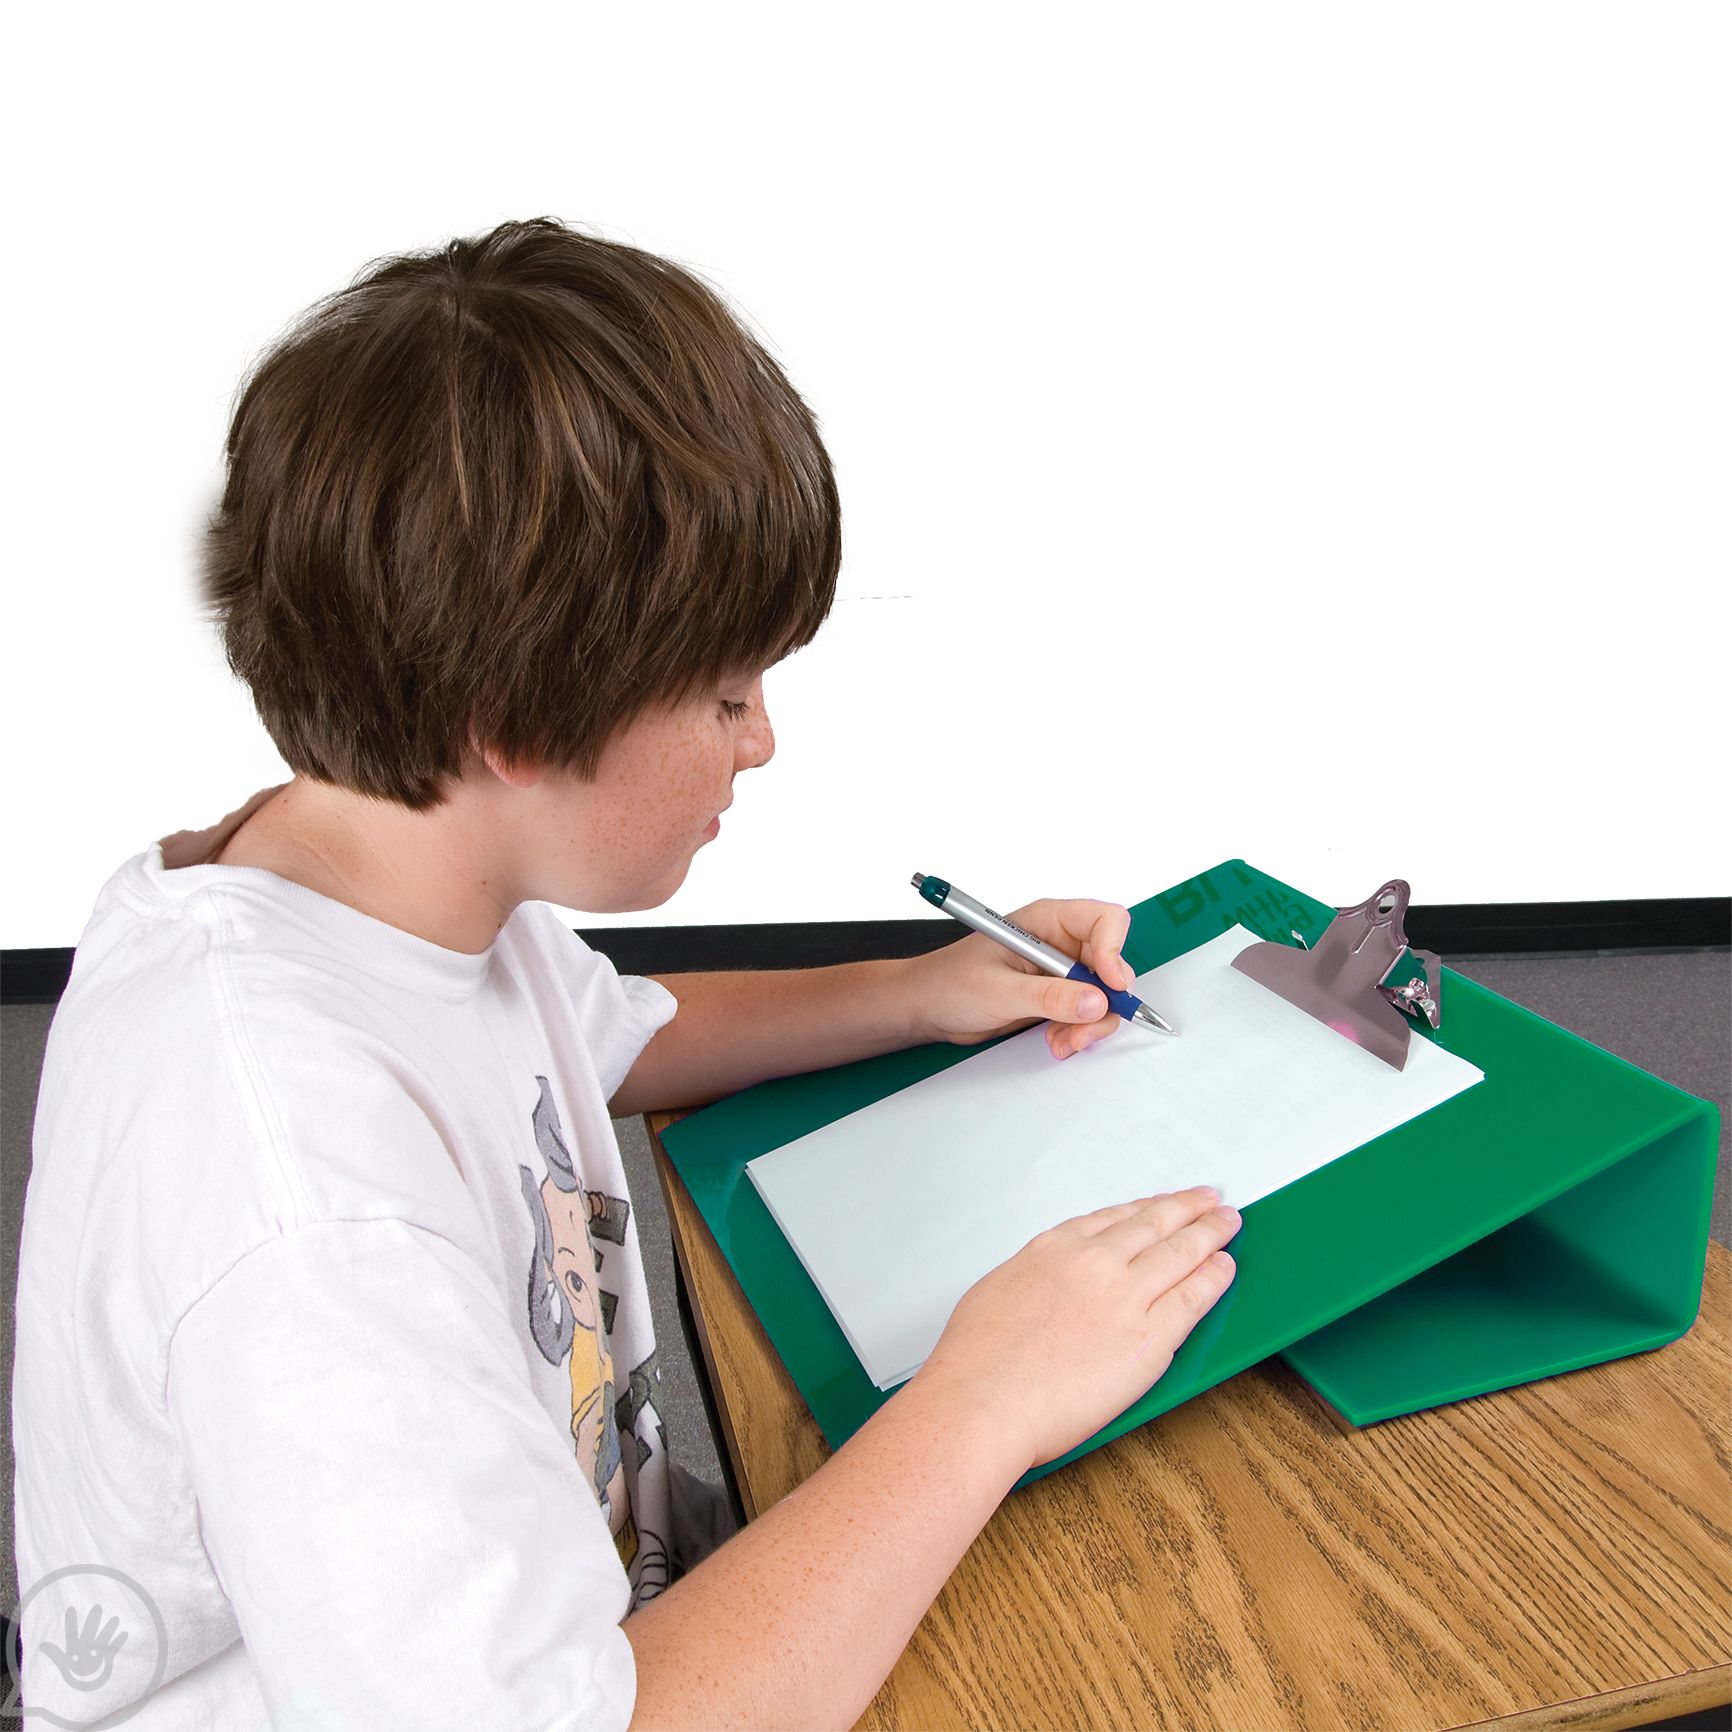 INNER-ACTIVE Slant Board for Writing Sloped Surface to Improve Handwriting Legibility, Posture, Positioning, Grasp, and Endurance - Great As Classroom